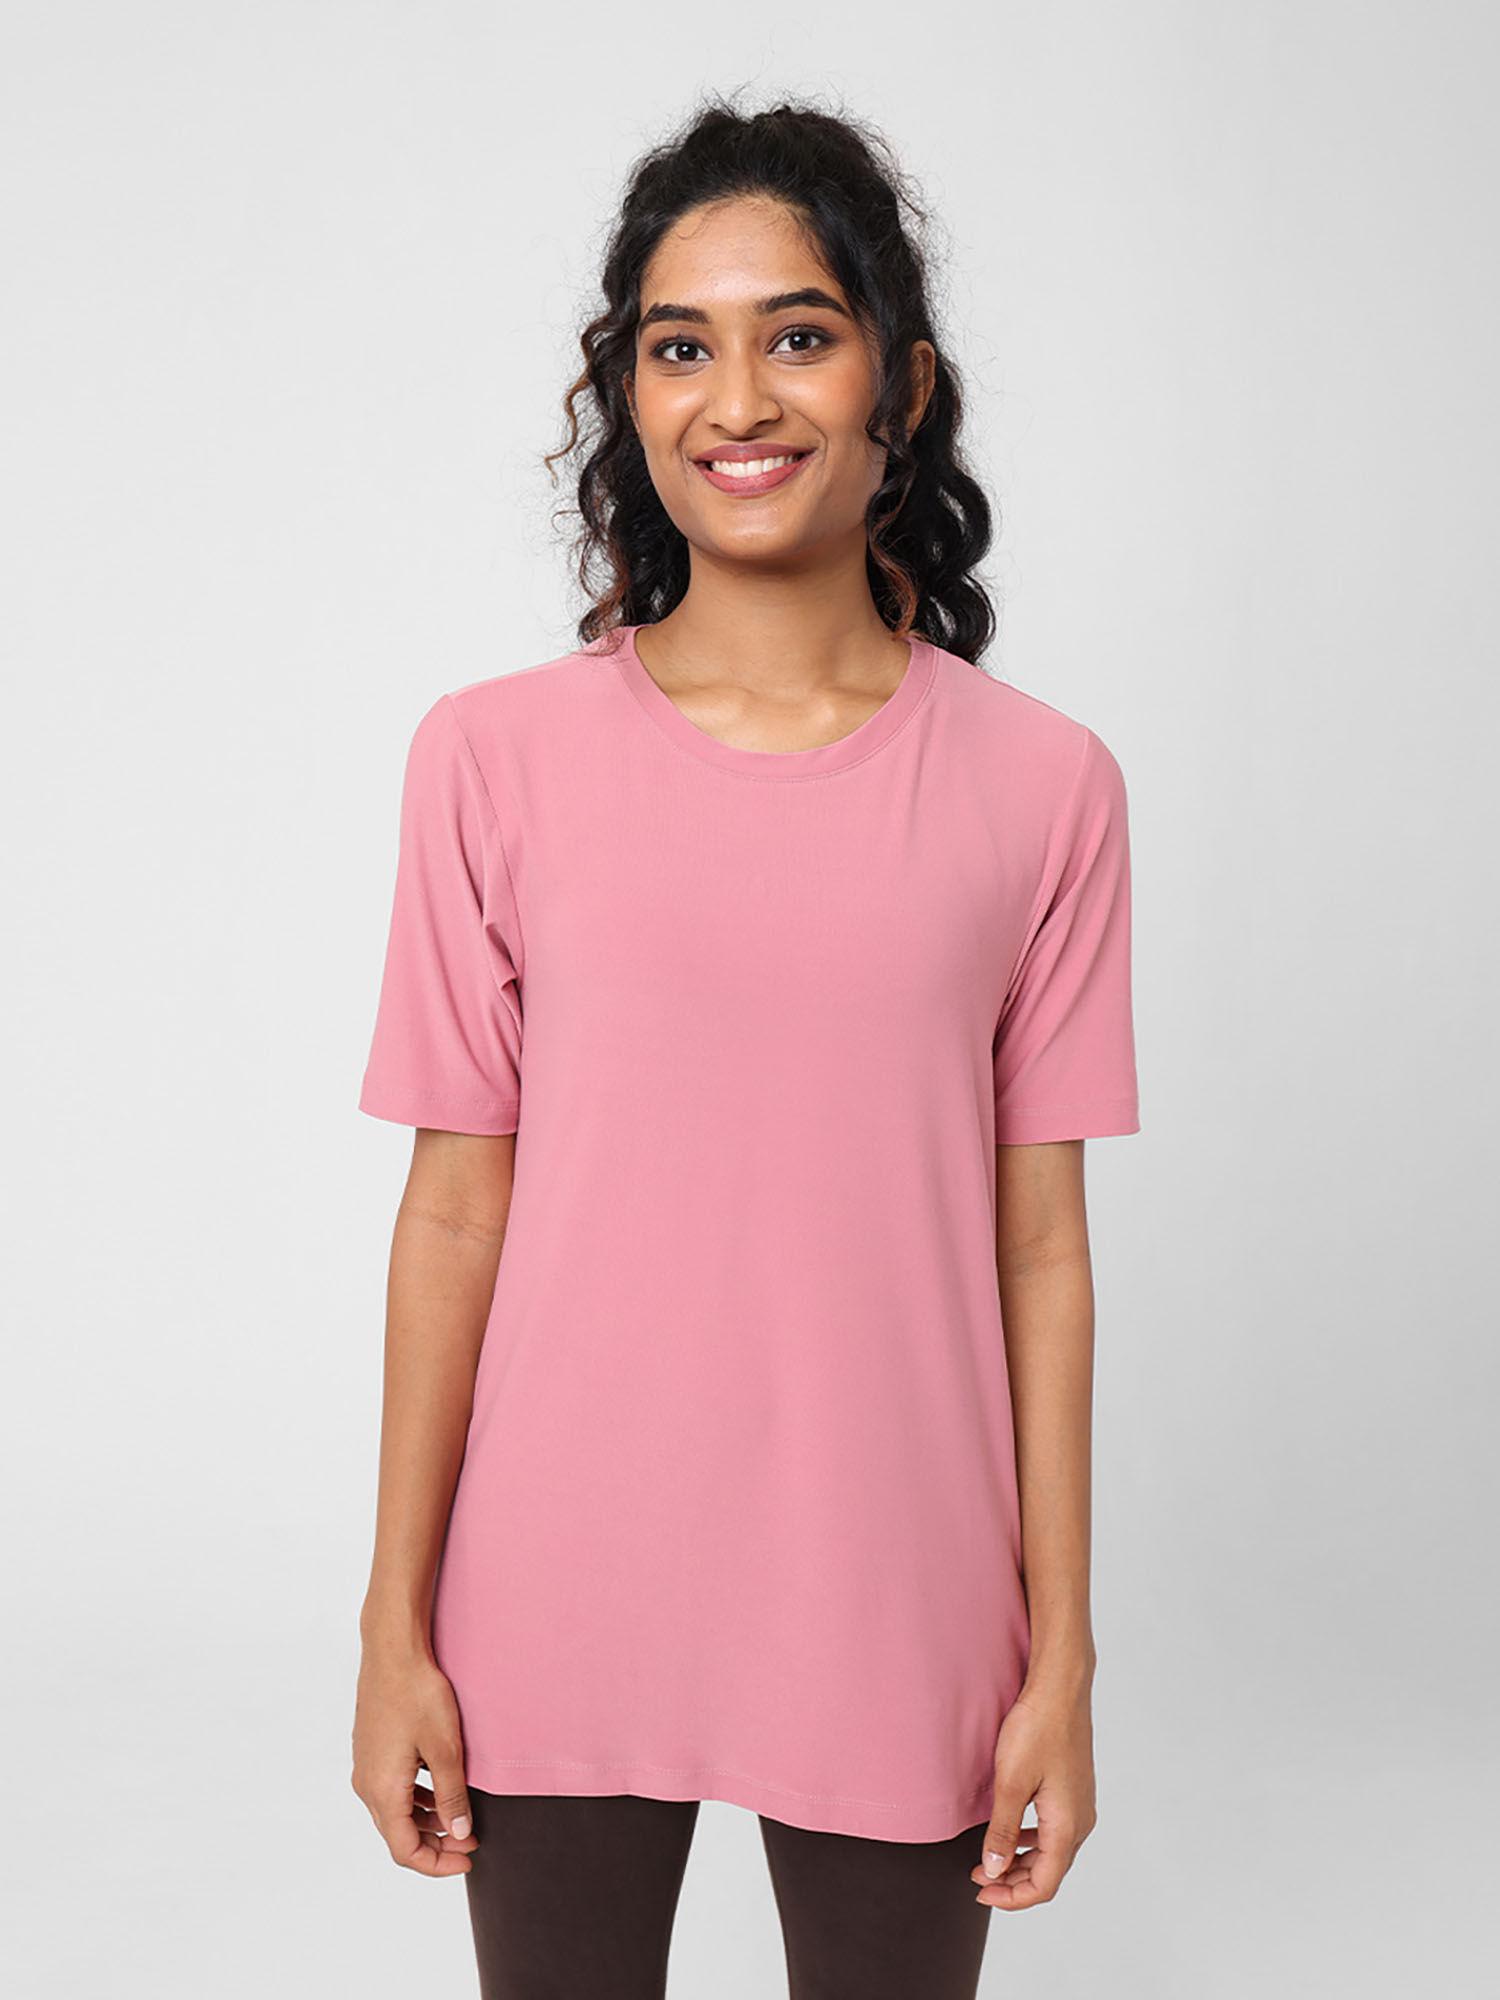 women-pink-breezy-kur-tee-with-2-pockets-and-side-slit